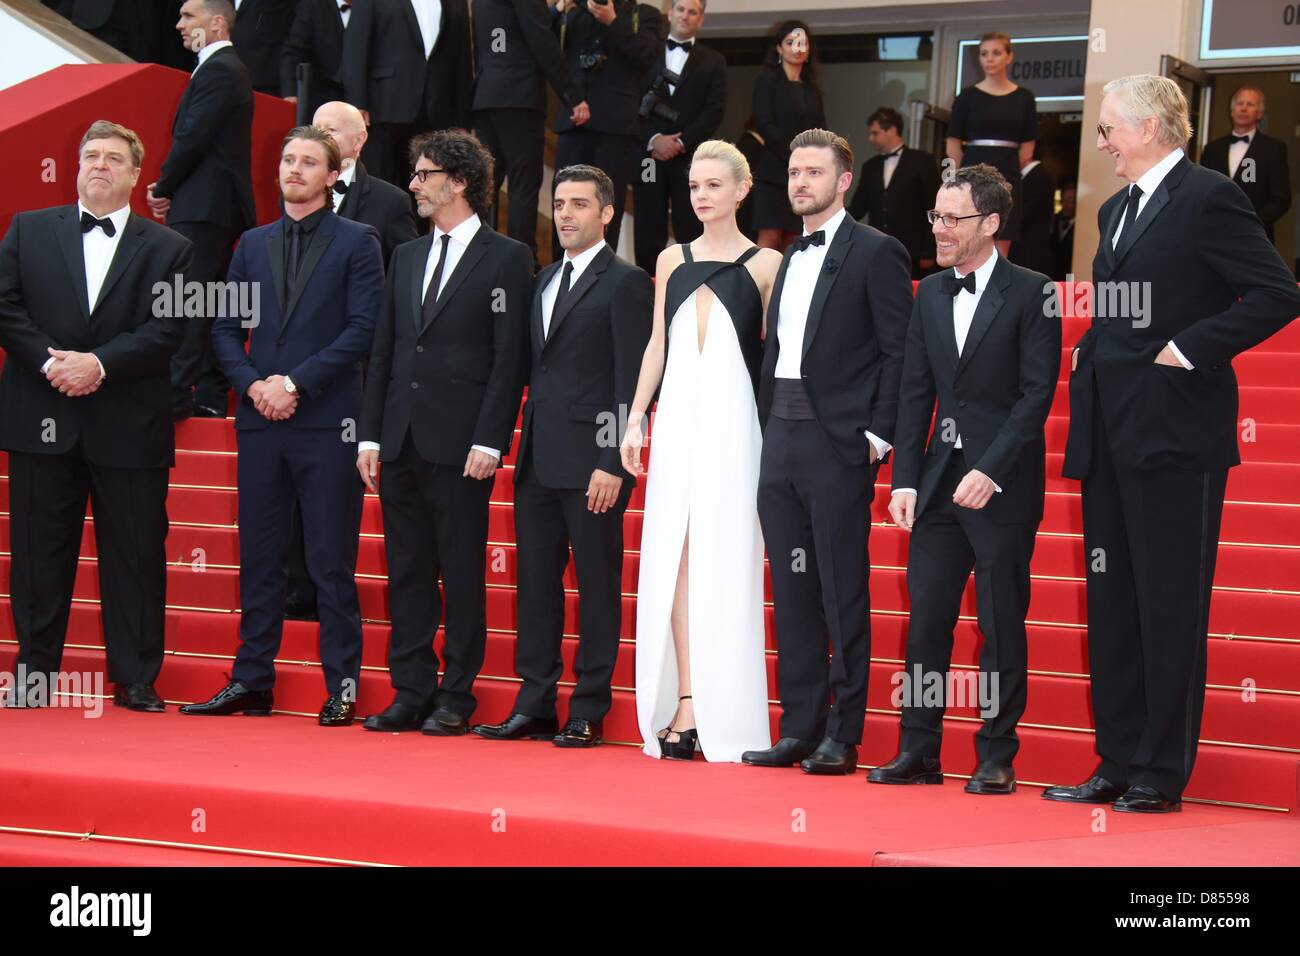 Cannes, France. 19th May 2013. Actor John Goodman (l-r), festival director Thierry Fremaux, Gilles Jacob, actor Garrett Hedlund, director Joel Coen, actors Oscar Isaac, Carey Mulligan, Justin Timberlake and director Ethan Coen attend the premiere of 'Inside Llewyn Davis' during the the 66th Cannes International Film Festival at Palais des Festivals in Cannes, France, on 19 May 2013. Photo: Hubert Boesl/dpa/Alamy Live News Stock Photo